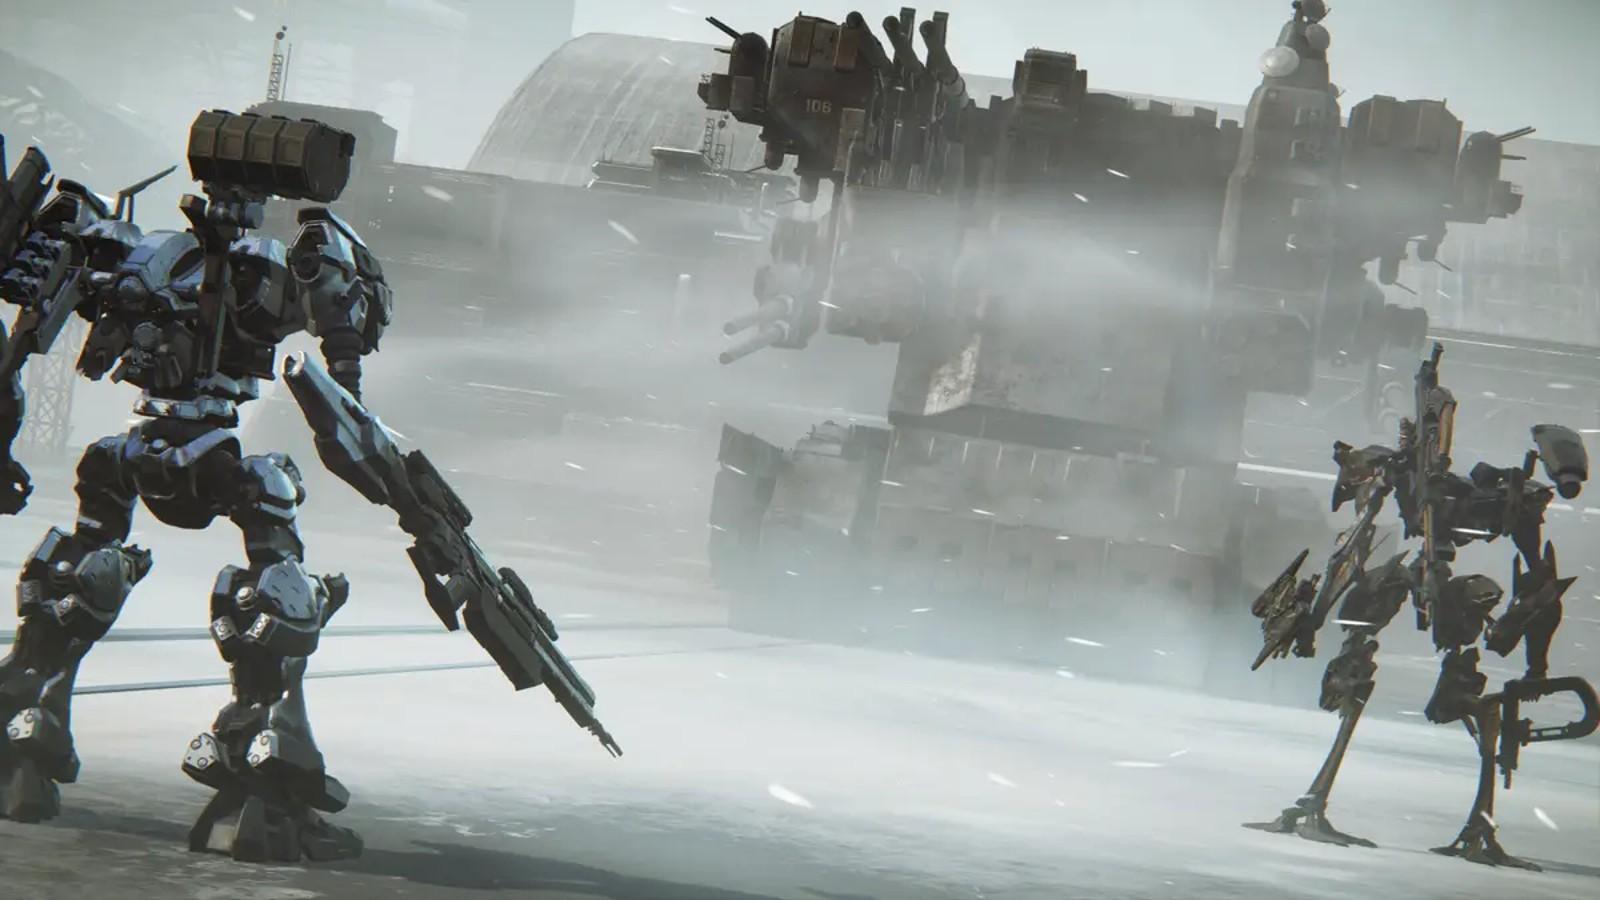 An image of Armored Core mechs from Armored Core 6.